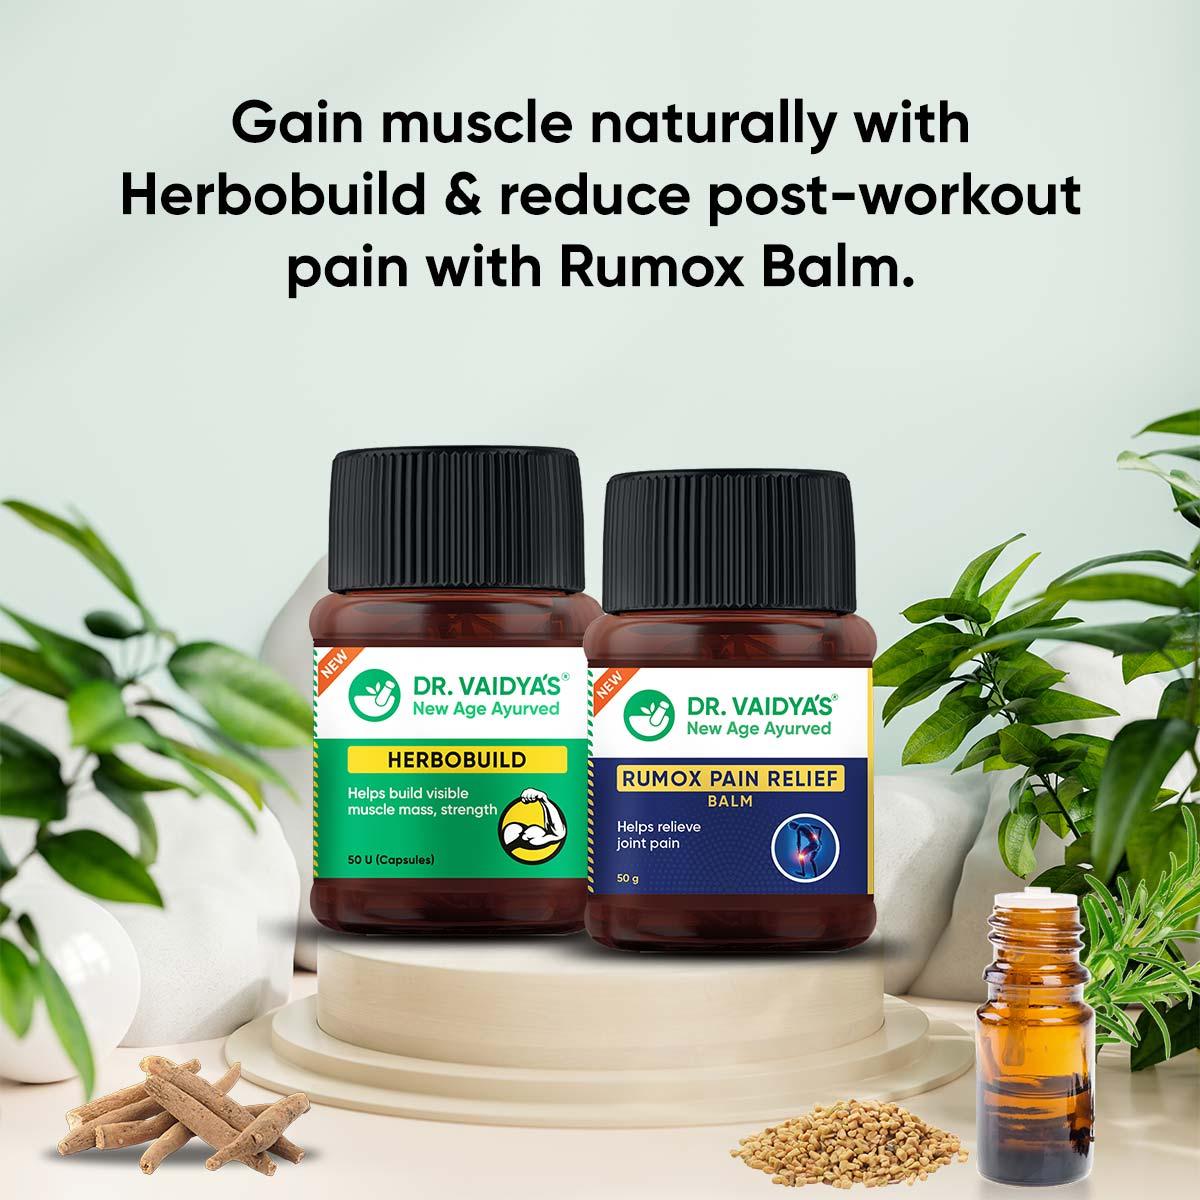 Herbobuild & Rumox Balm Combo: For Faster Muscle Gain and Relief From Muscle Stiffness & Soreness - Herbobuild